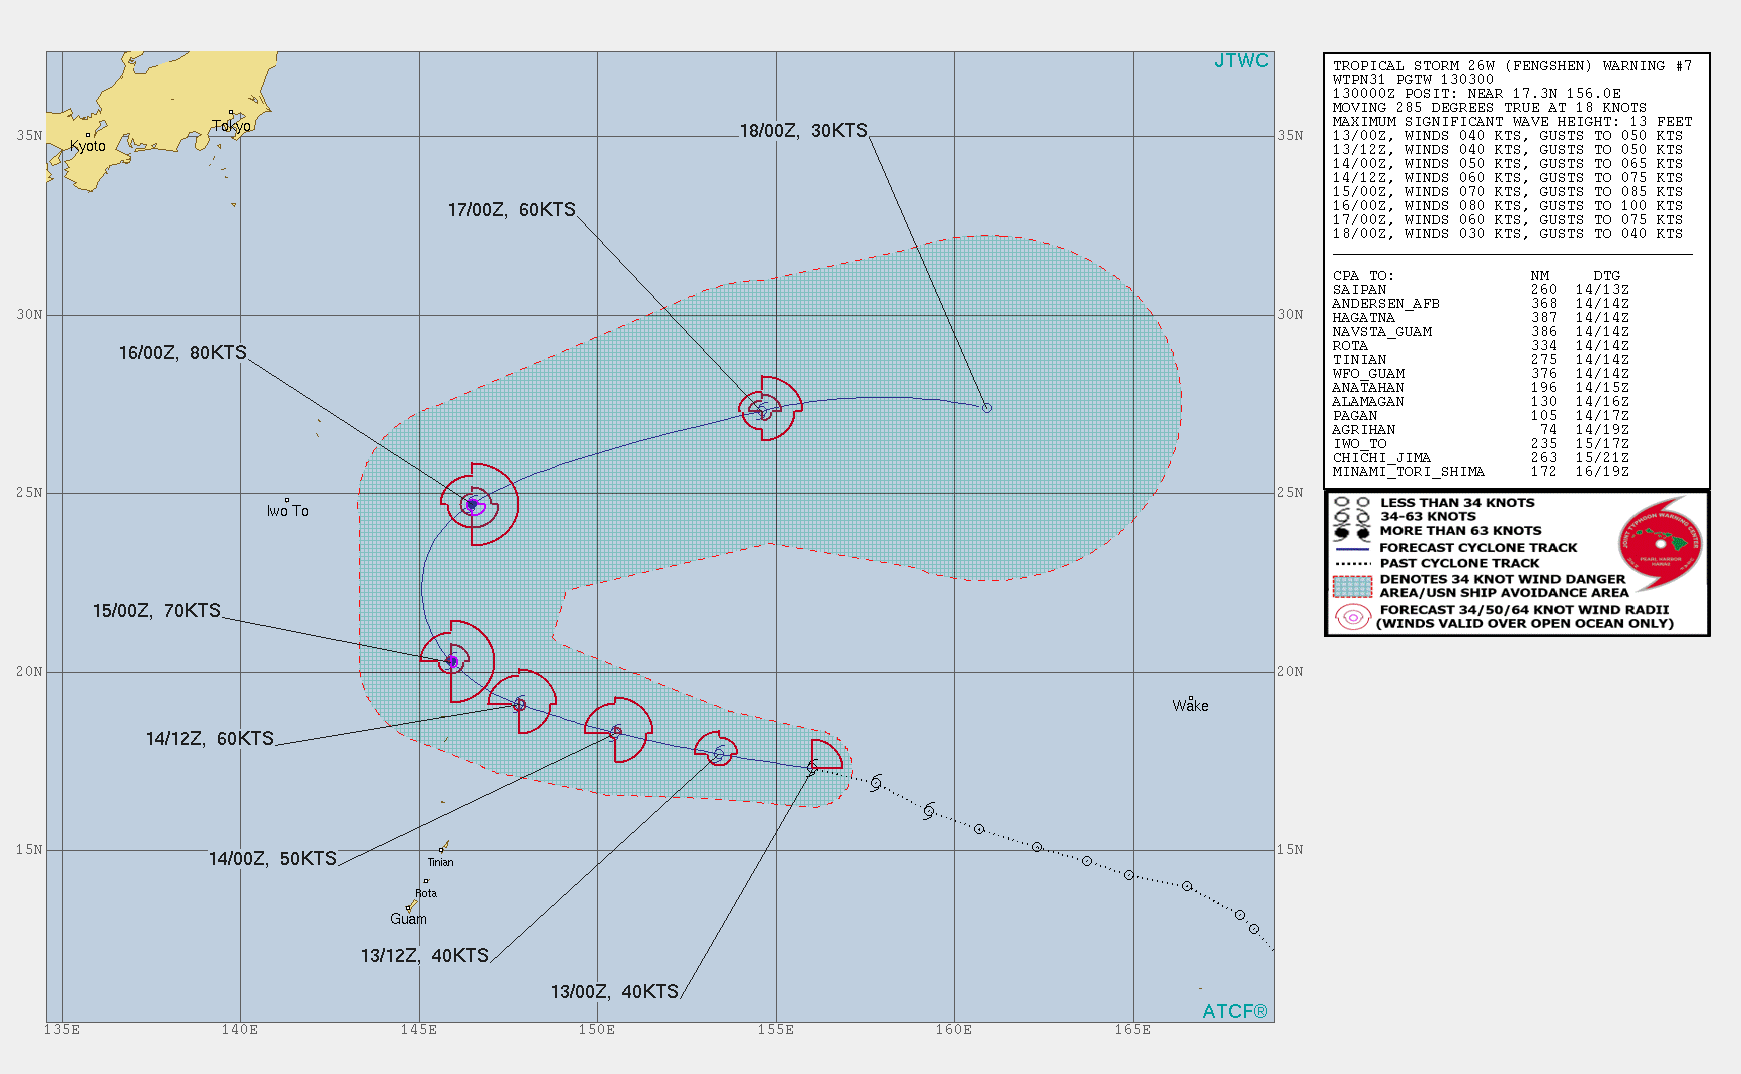 26W: FORECAST TO REACH TYPHOON INTENSITY AFTER 36H